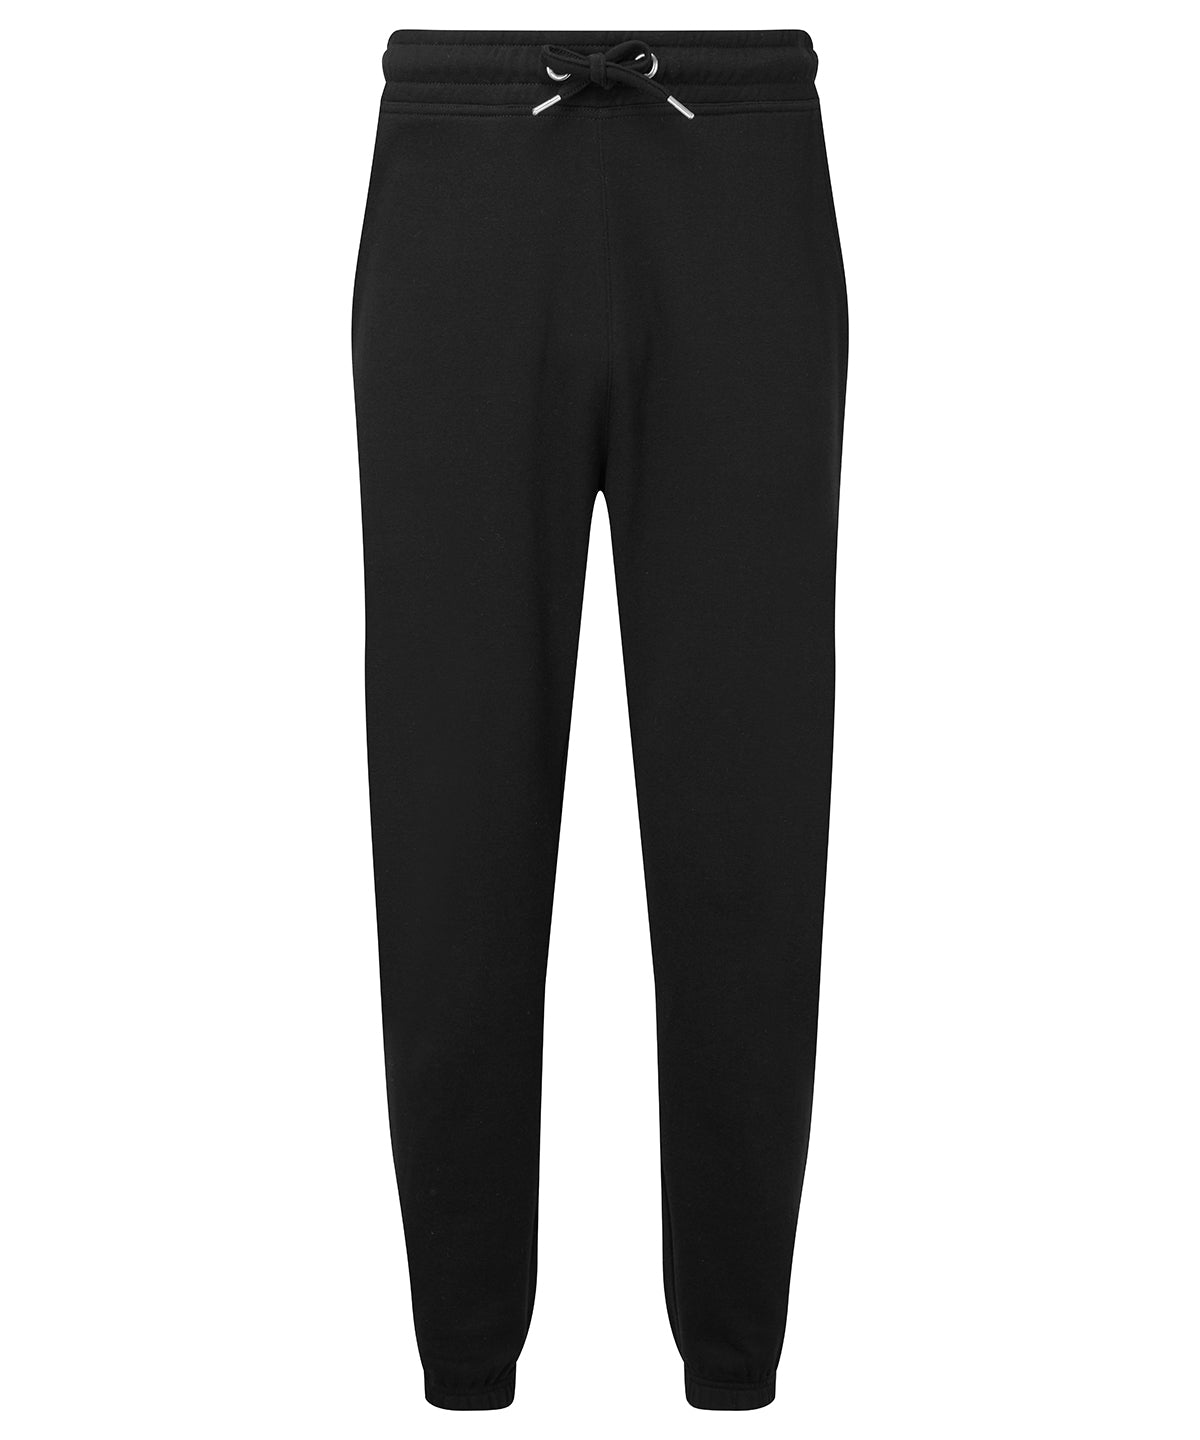 Black - Men's TriDri® classic joggers Sweatpants TriDri® Co-ords, Everyday Essentials, Exclusives, Joggers, Must Haves, New For 2021, New In Autumn Winter, New In Mid Year, Street Casual, Streetwear, Tracksuits, Working From Home Schoolwear Centres